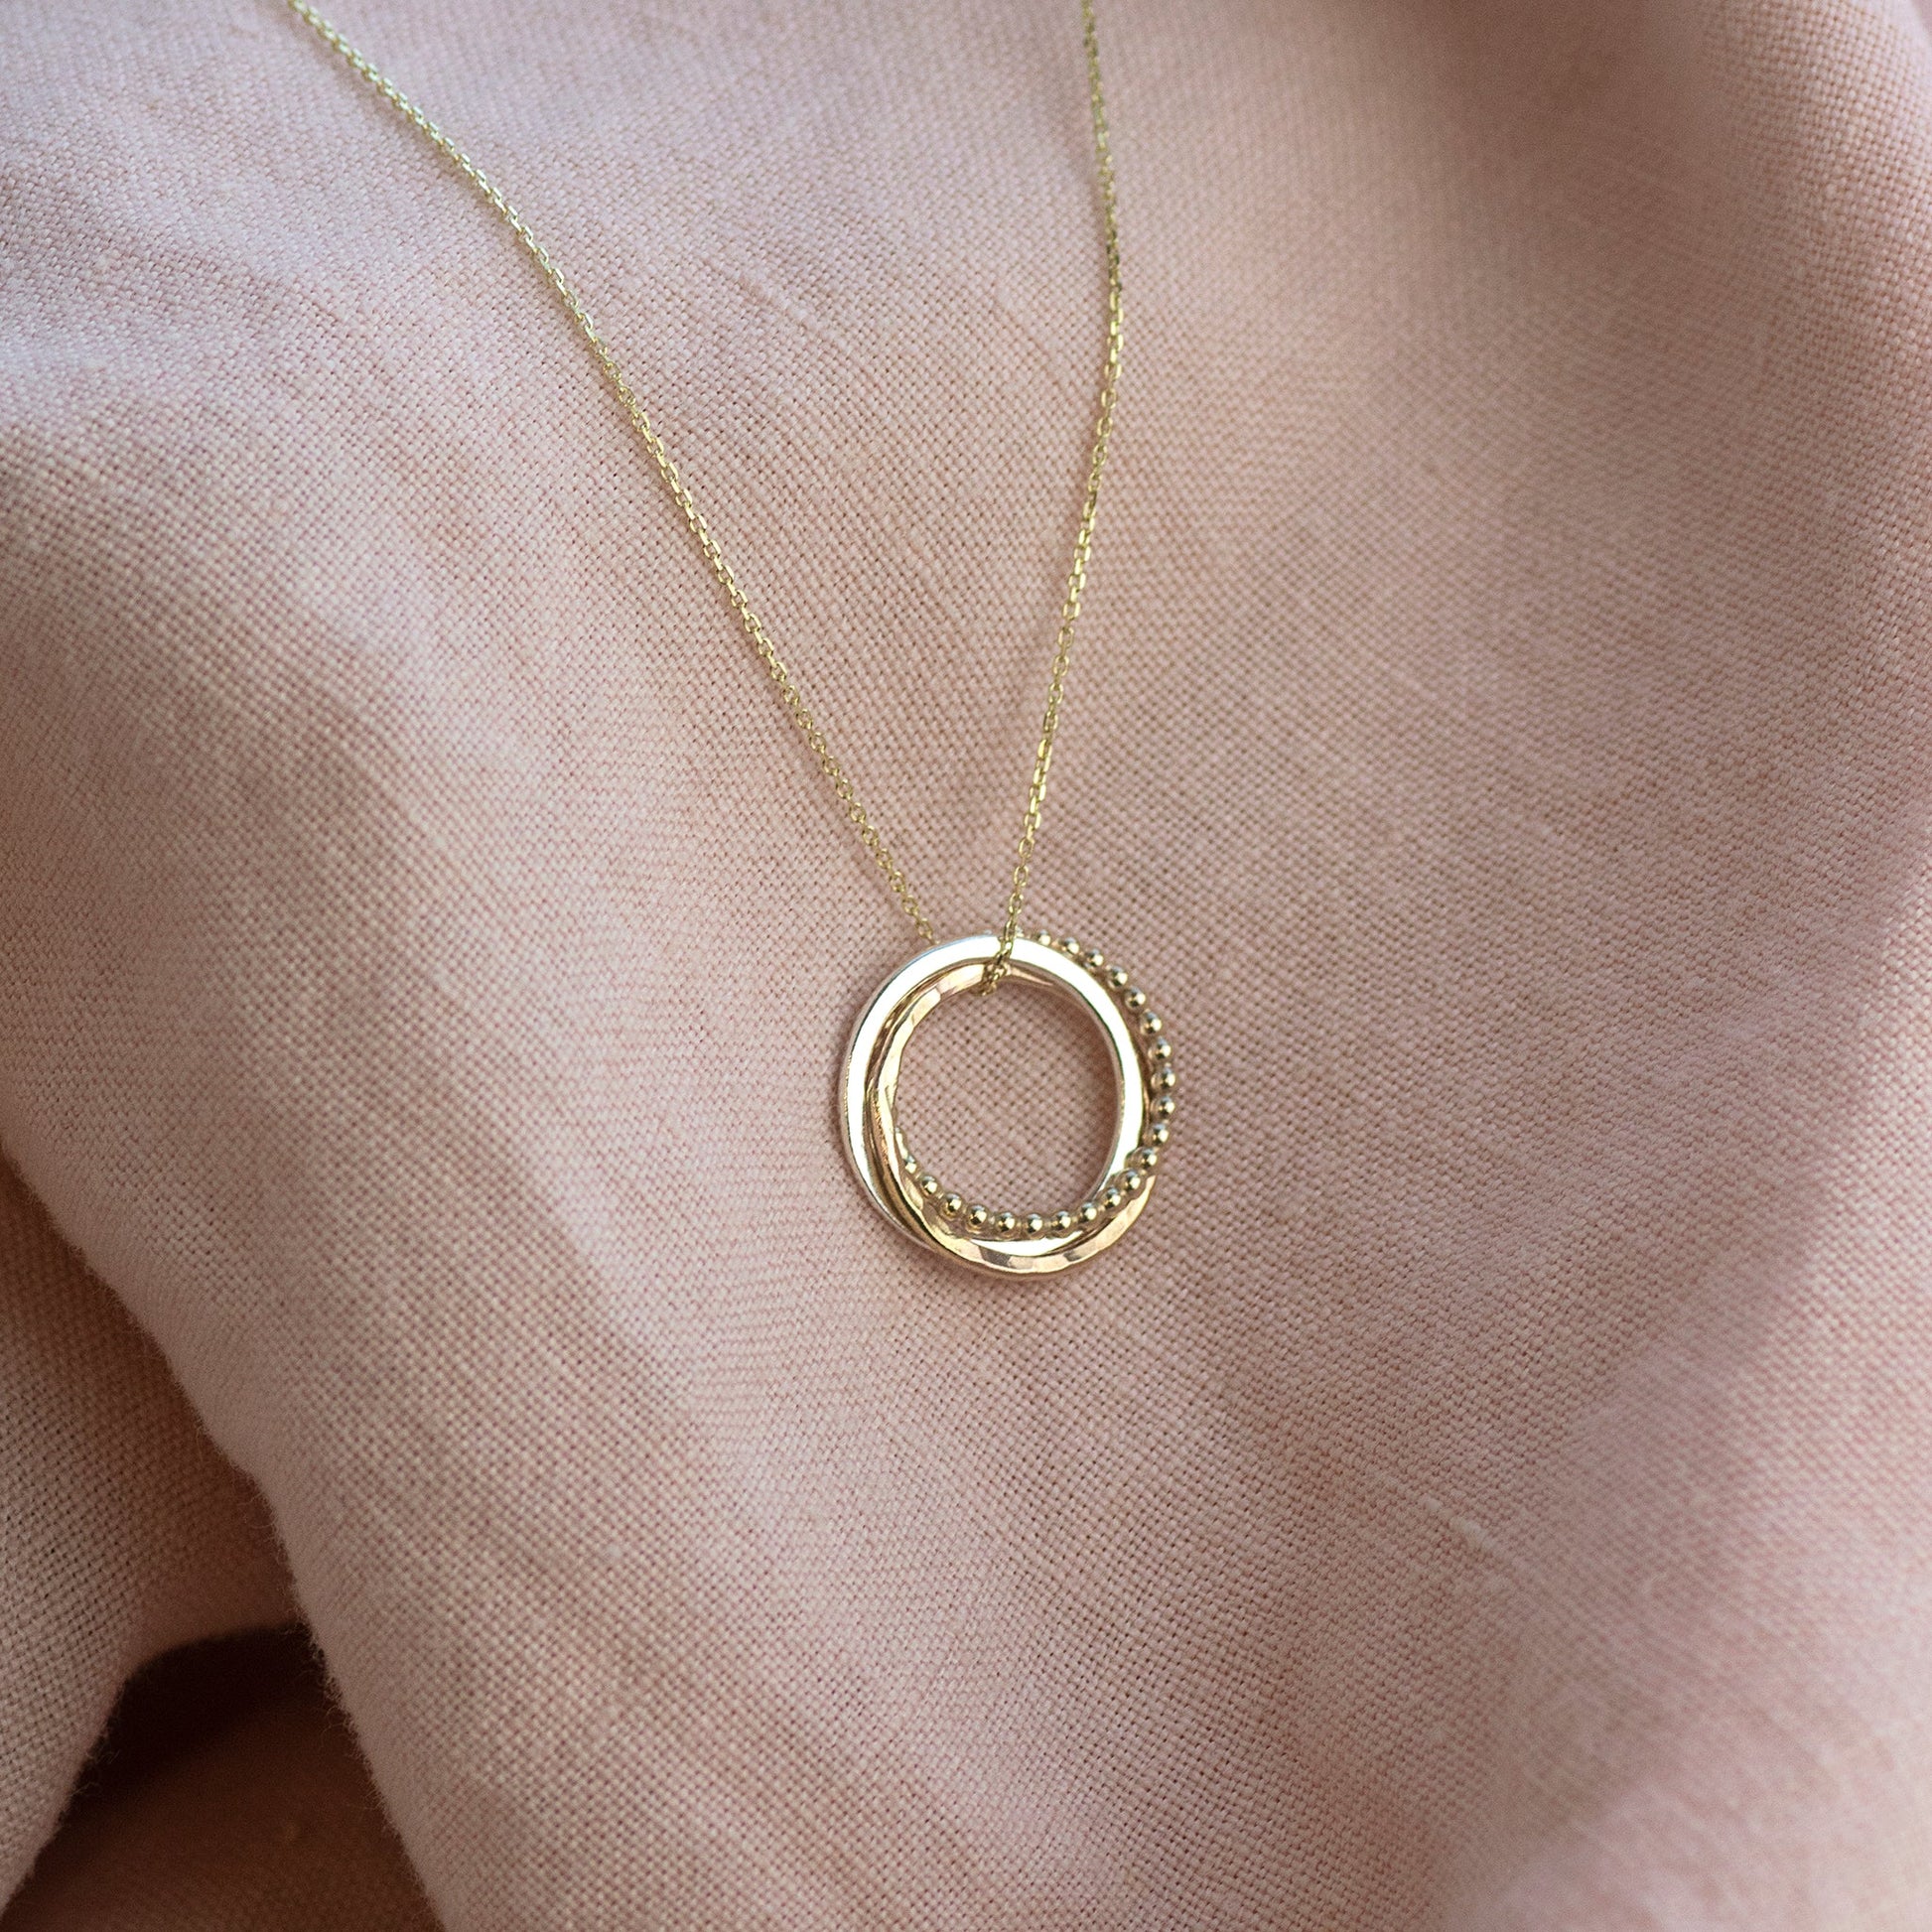 9kt Gold 30th Birthday Necklace - The Original 3 Links for 3 Decades Necklace - Petite Recycled Gold, Rose Gold & Silver